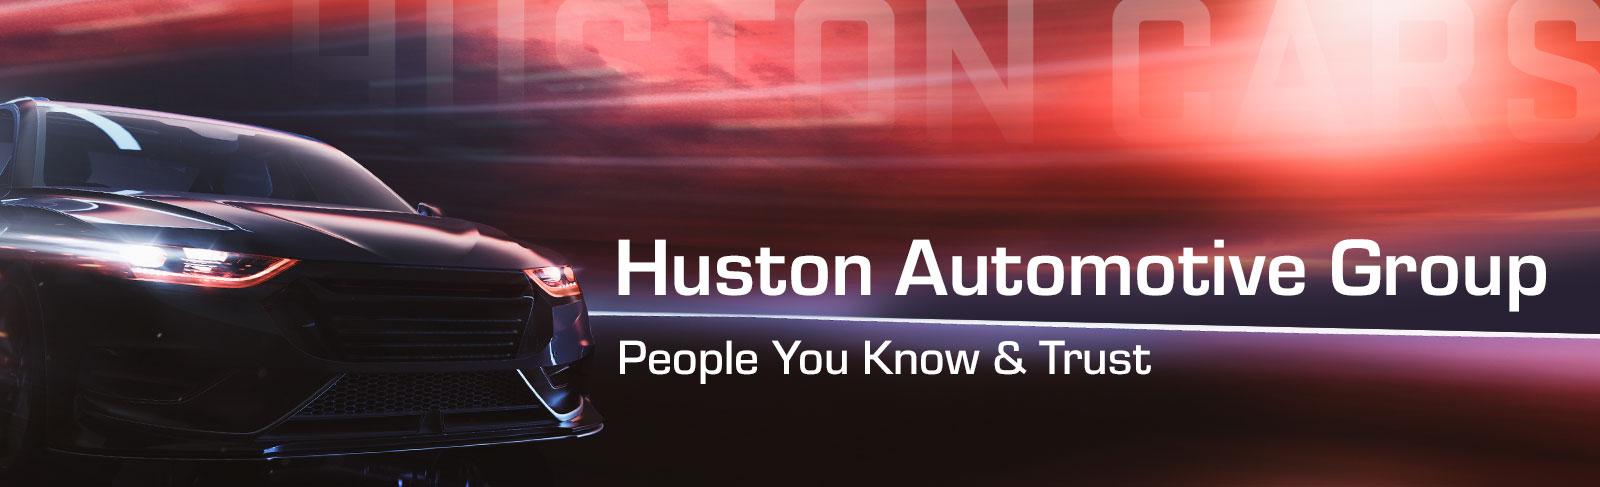 Huston Automotive Group | People You Know & Trust